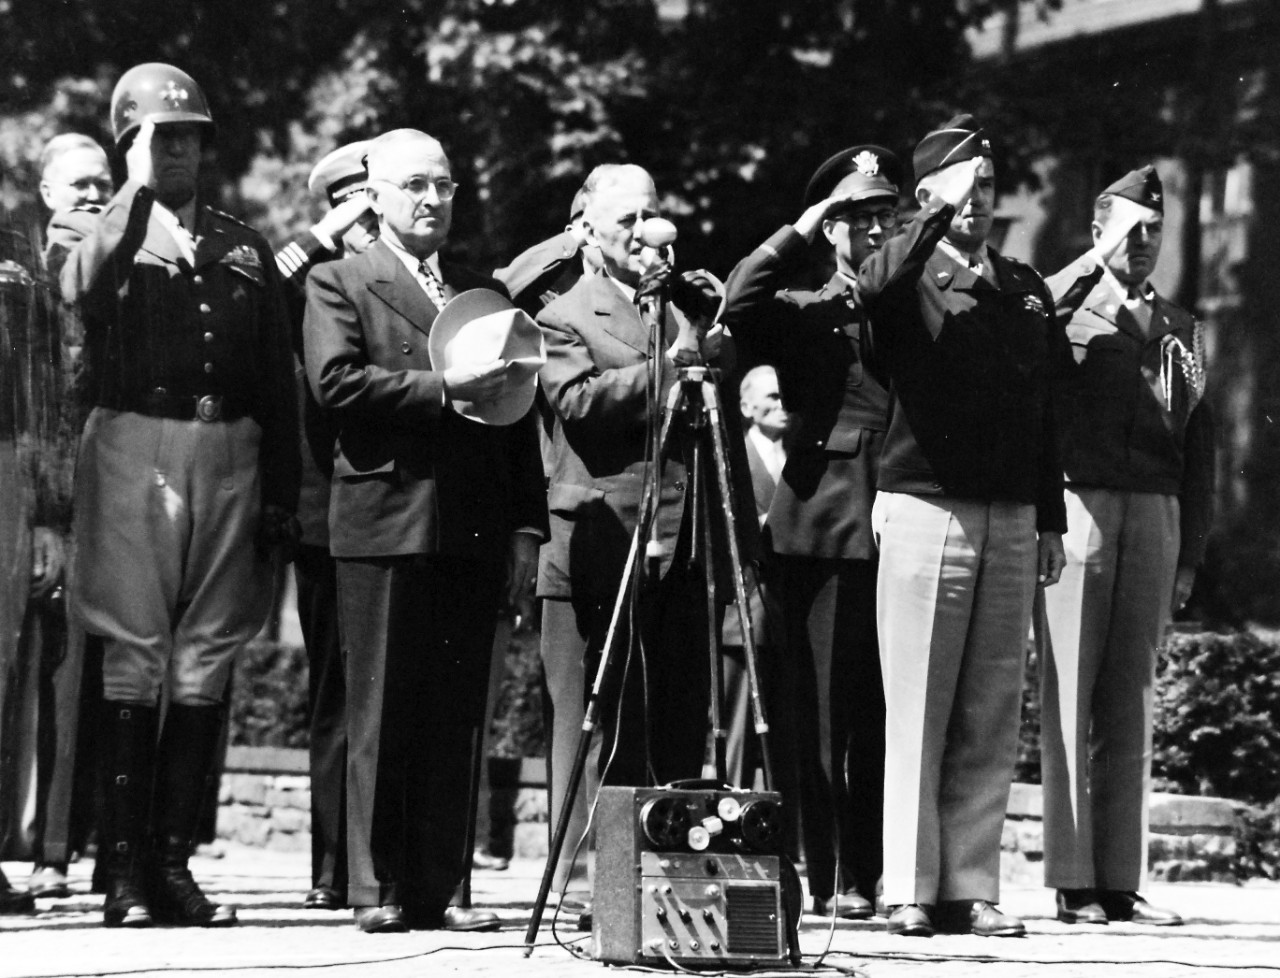 80-G-700072:   U.S. Navy in Germany, 1945.   President Harry S. Truman attends flag-raising ceremony in Berlin, Germany.   At attention while National Anthem is being played.  Left to right: Brigadier General Harry Vaughn, Military Aide; General George S. Patton; President Harry S. Truman; Secretary of War Harry Stimson and General Omar W. Bradley.     Photographed by CPhom William Belknap, Jr., July 20, 1945.   Official U.S. Navy photograph, now in the collections of the National Archives.  (2017/02/14).  